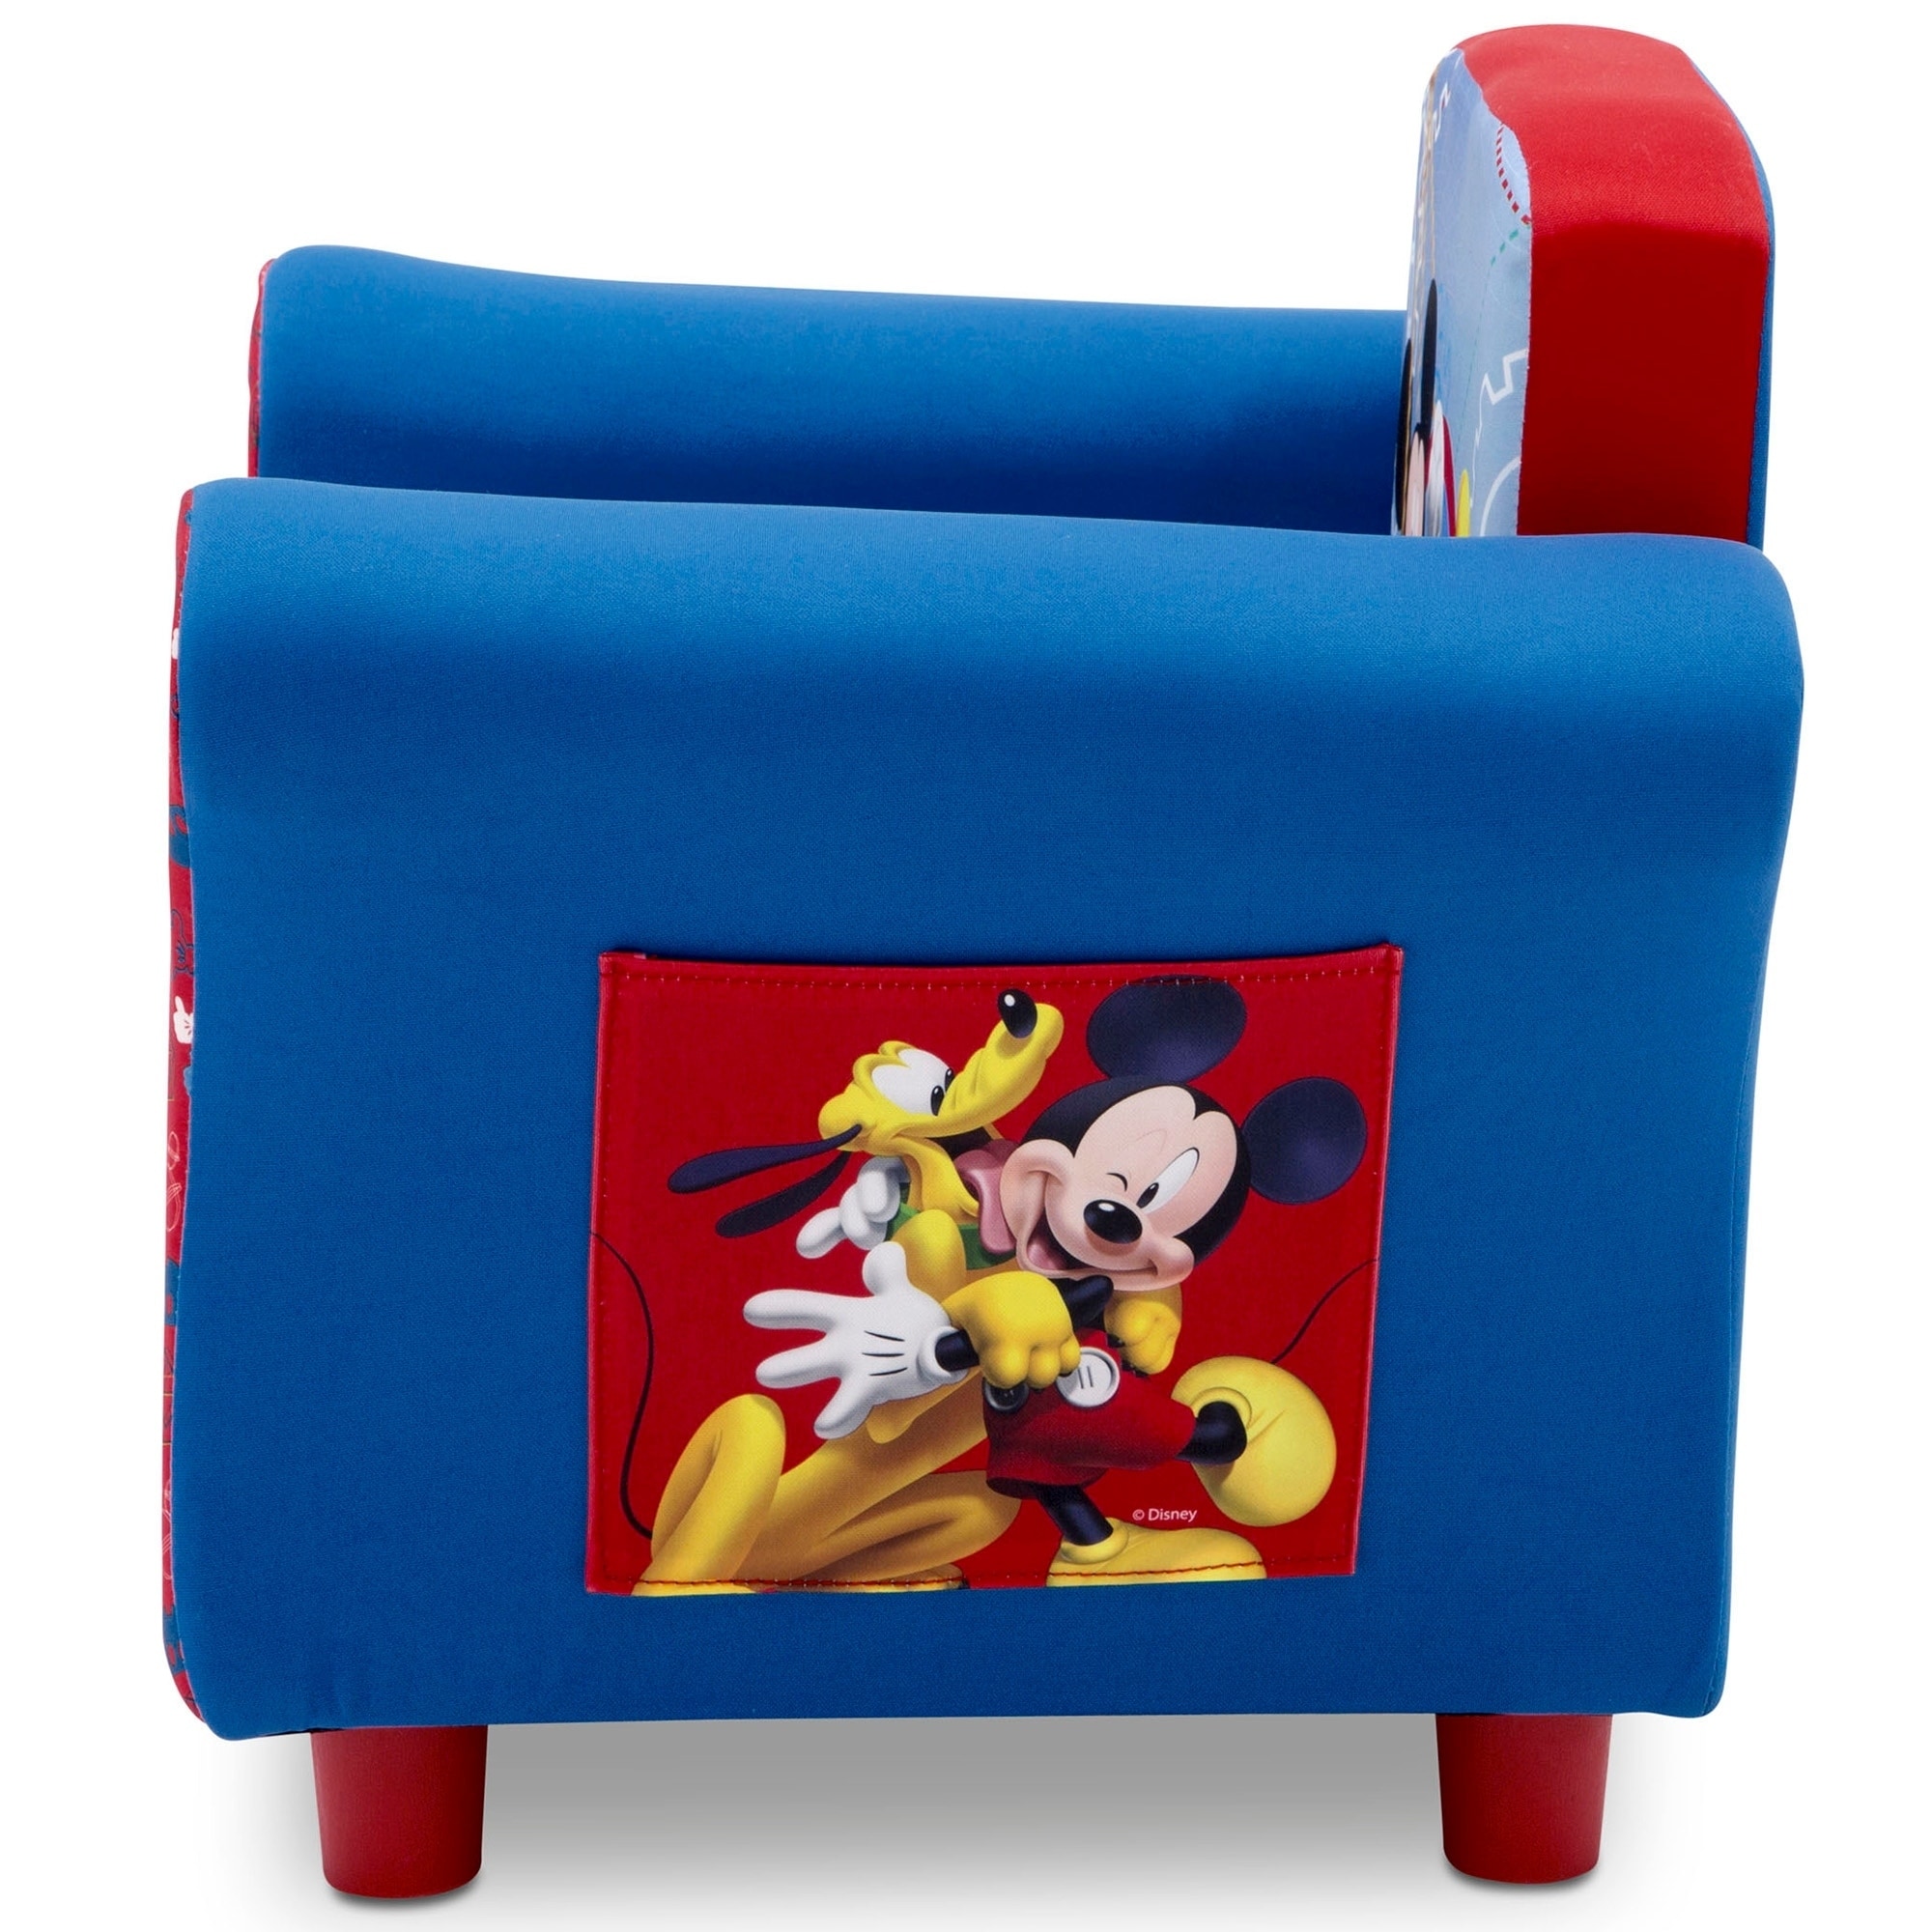 mickey mouse sofa chair